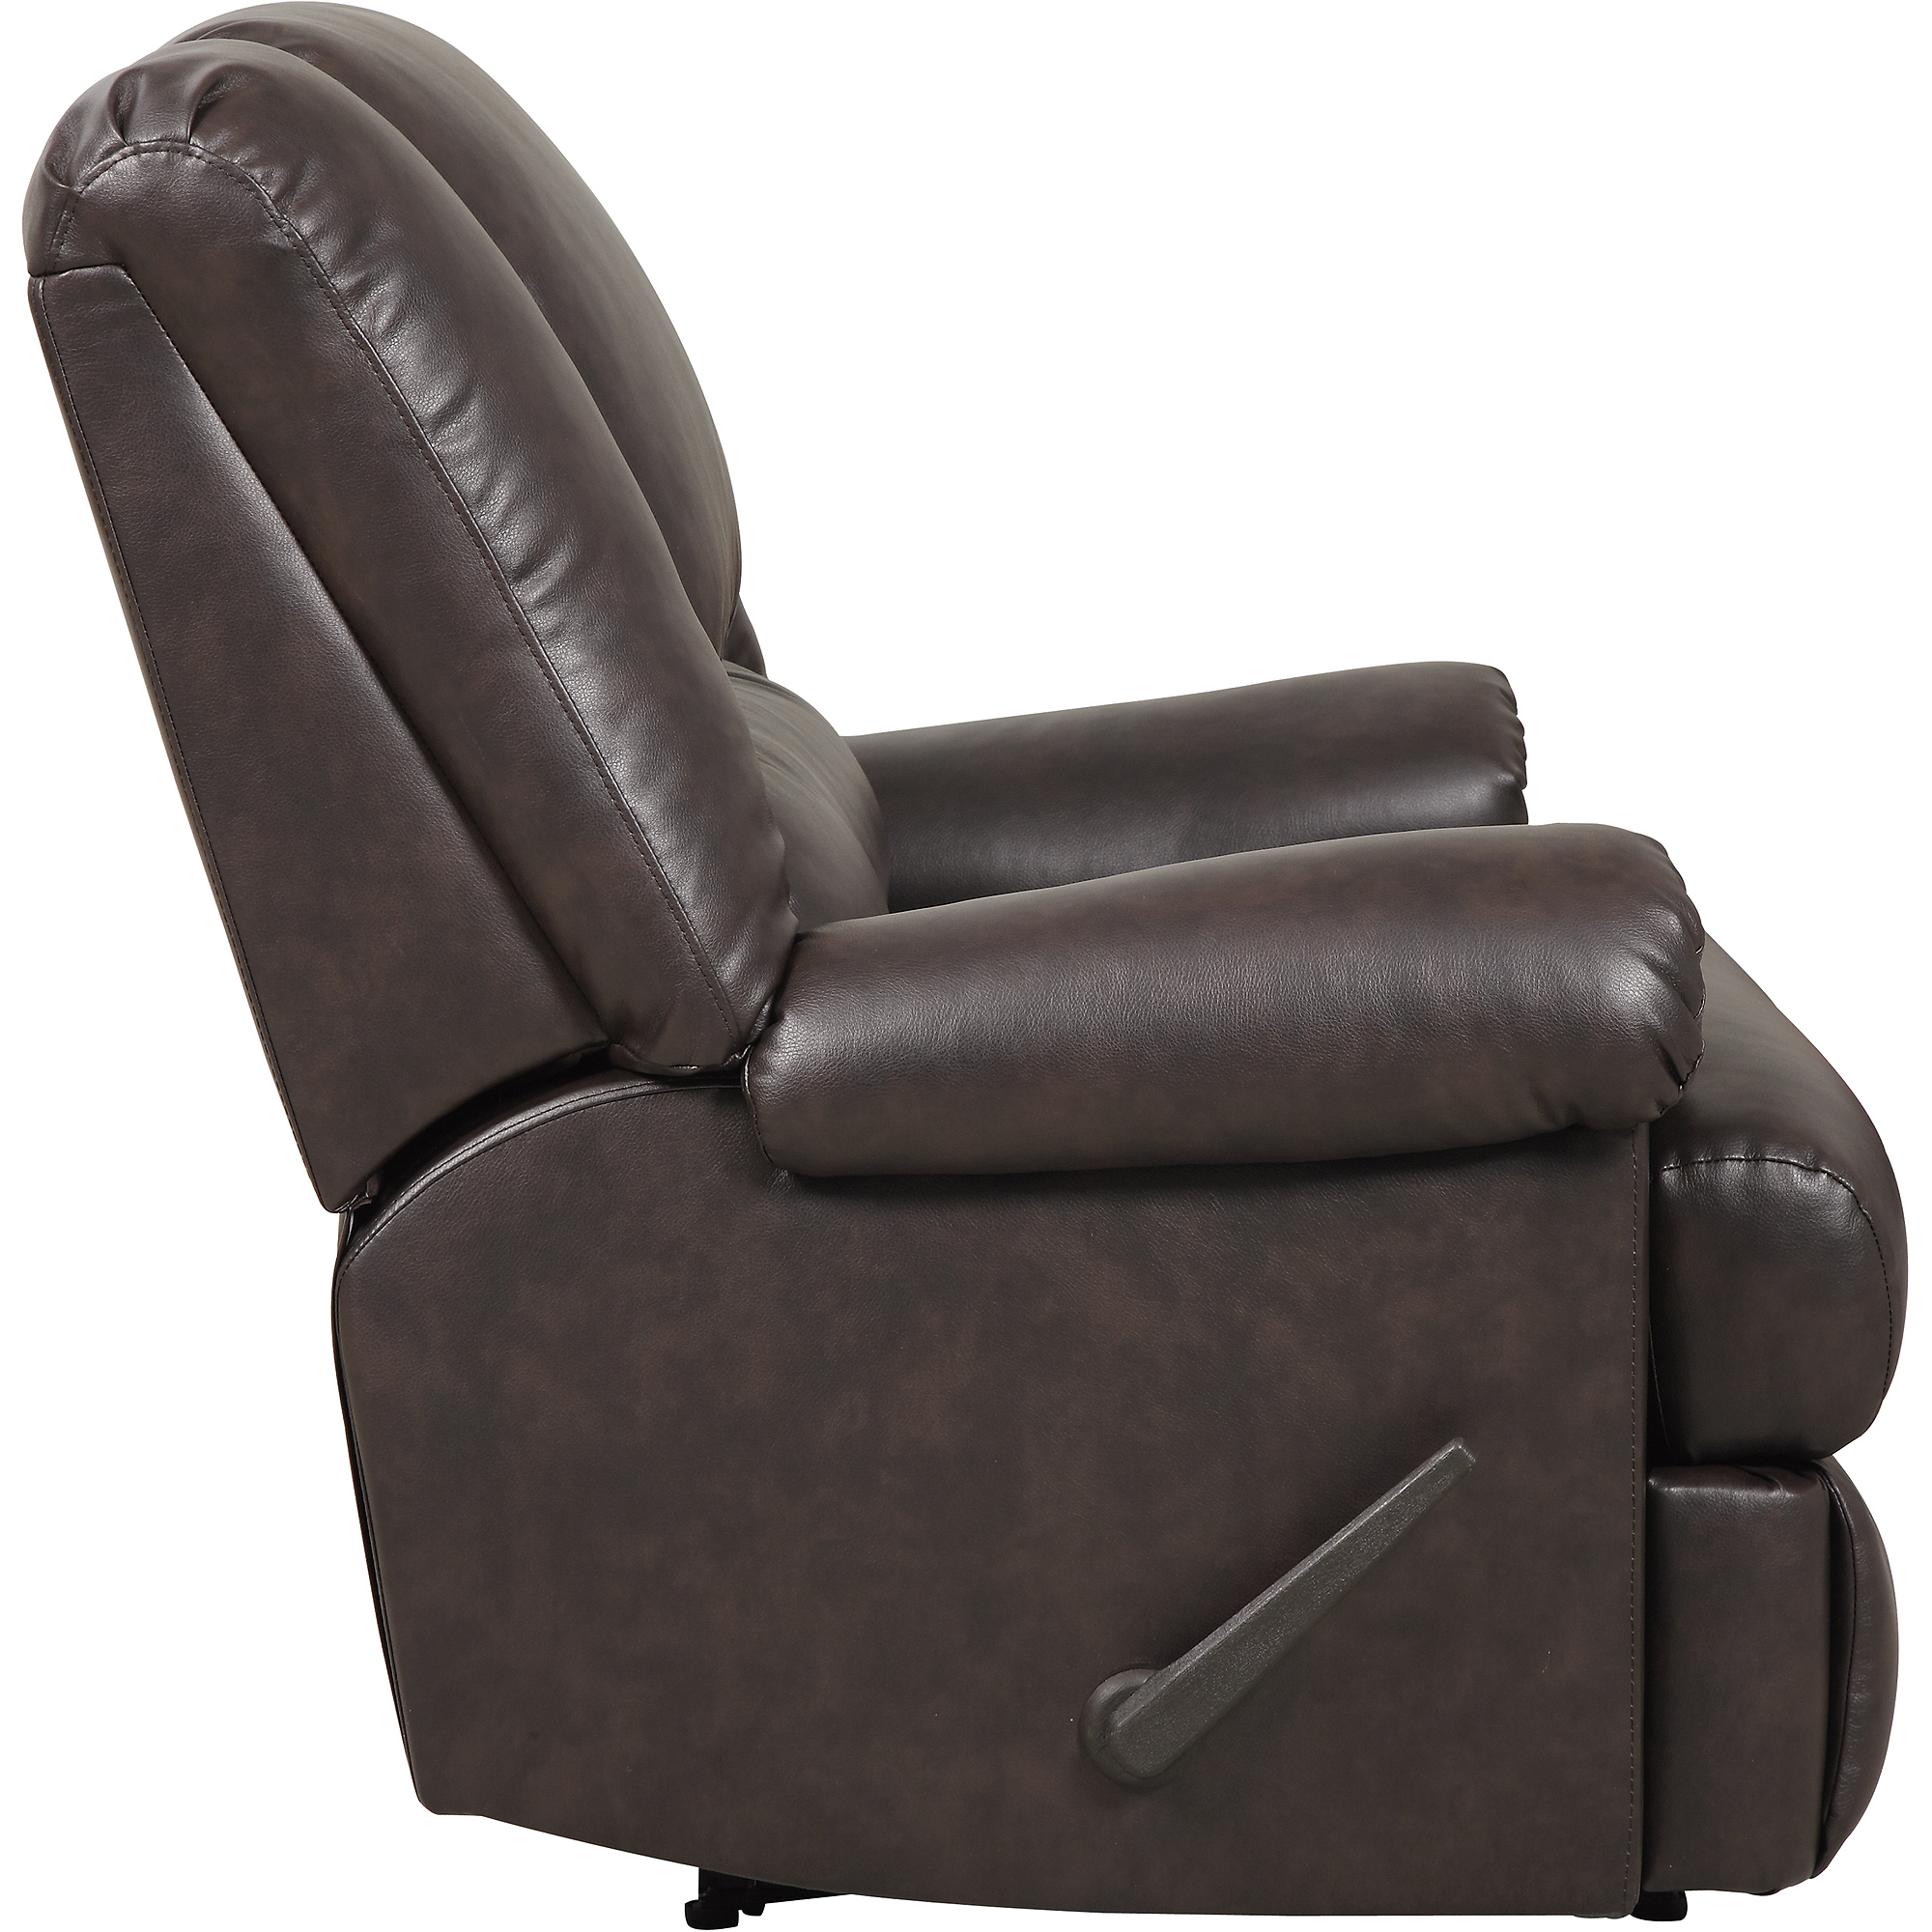 Stanford Faux Leather Chair And A Half R - image 5 of 6